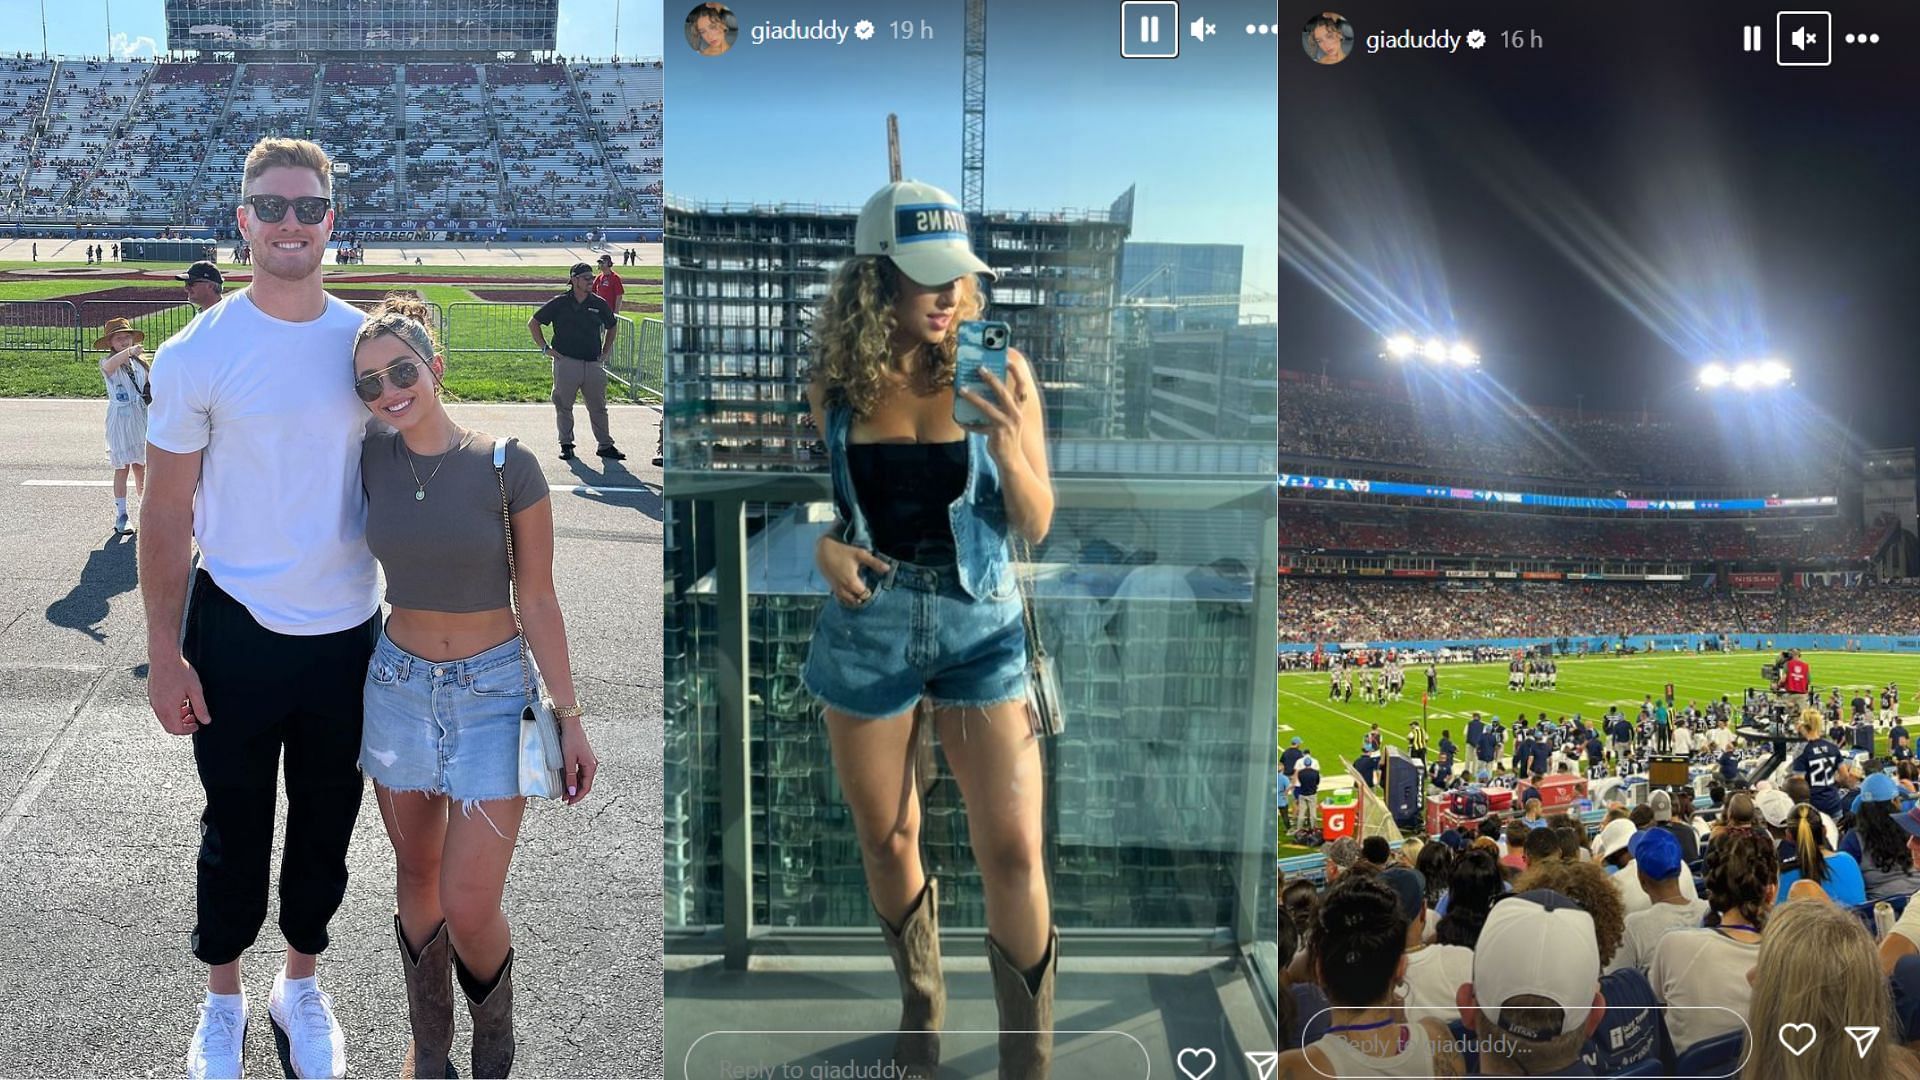 Gia Duddy attends Tennessee Titan